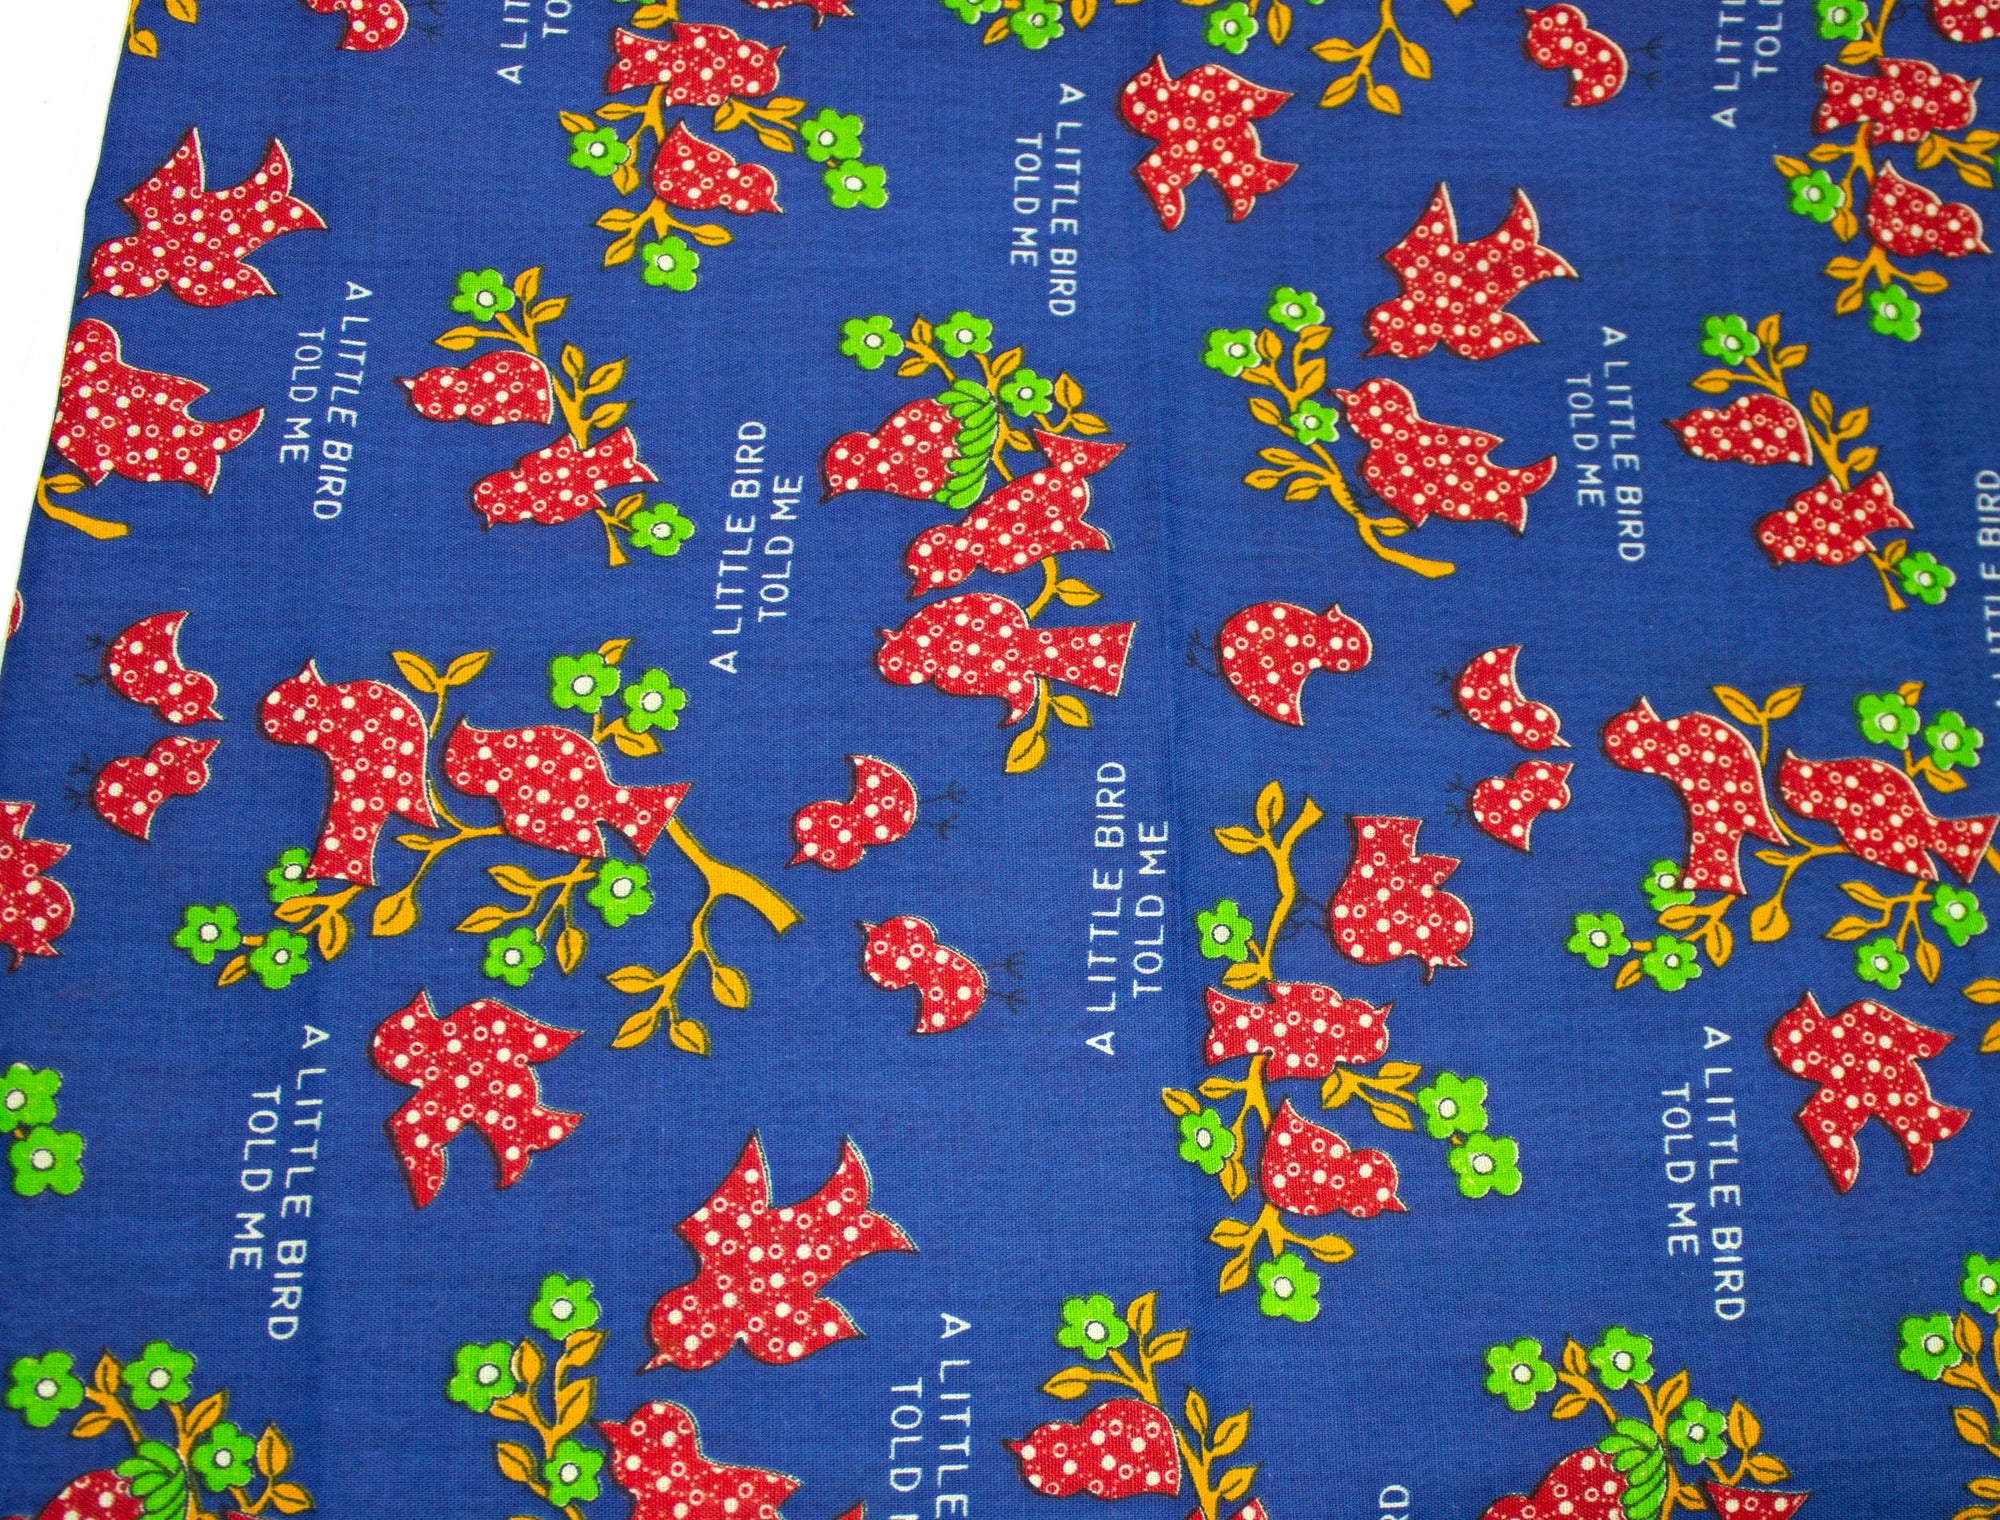 Vintage Fabric "A Little Birdie Told Me" Cotton Print 45" Wide - Sold by the Yard